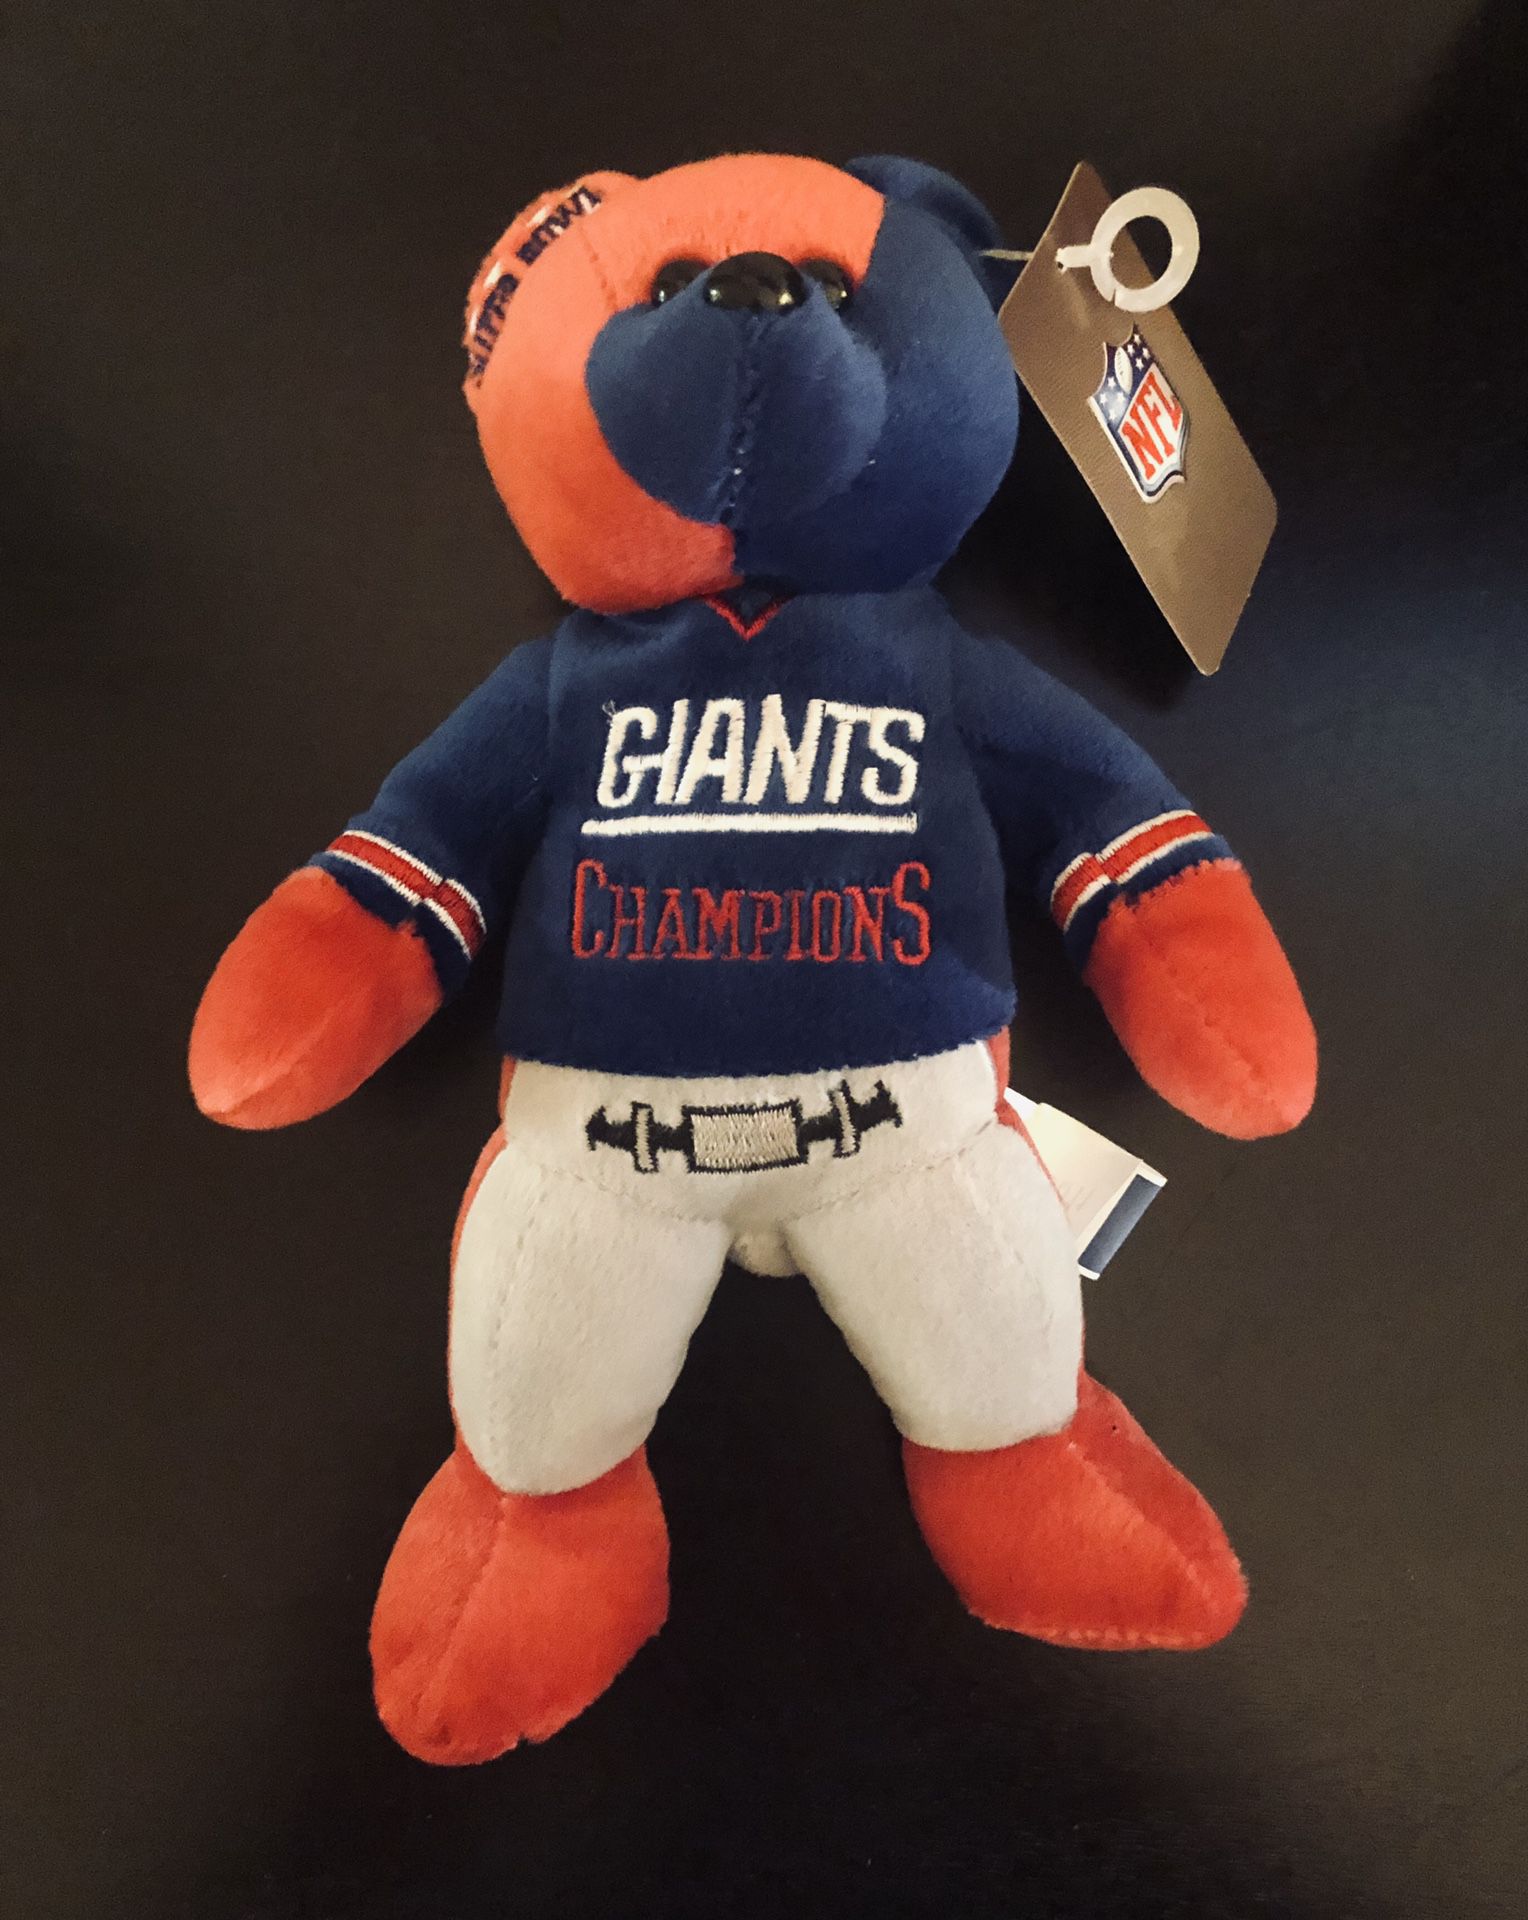 2008 NY New York Giants NFL Football SuperBowl XLII Champions Forever Collectibles Stuffed Plush Beanie Bear Animal - BRAND NEW!!